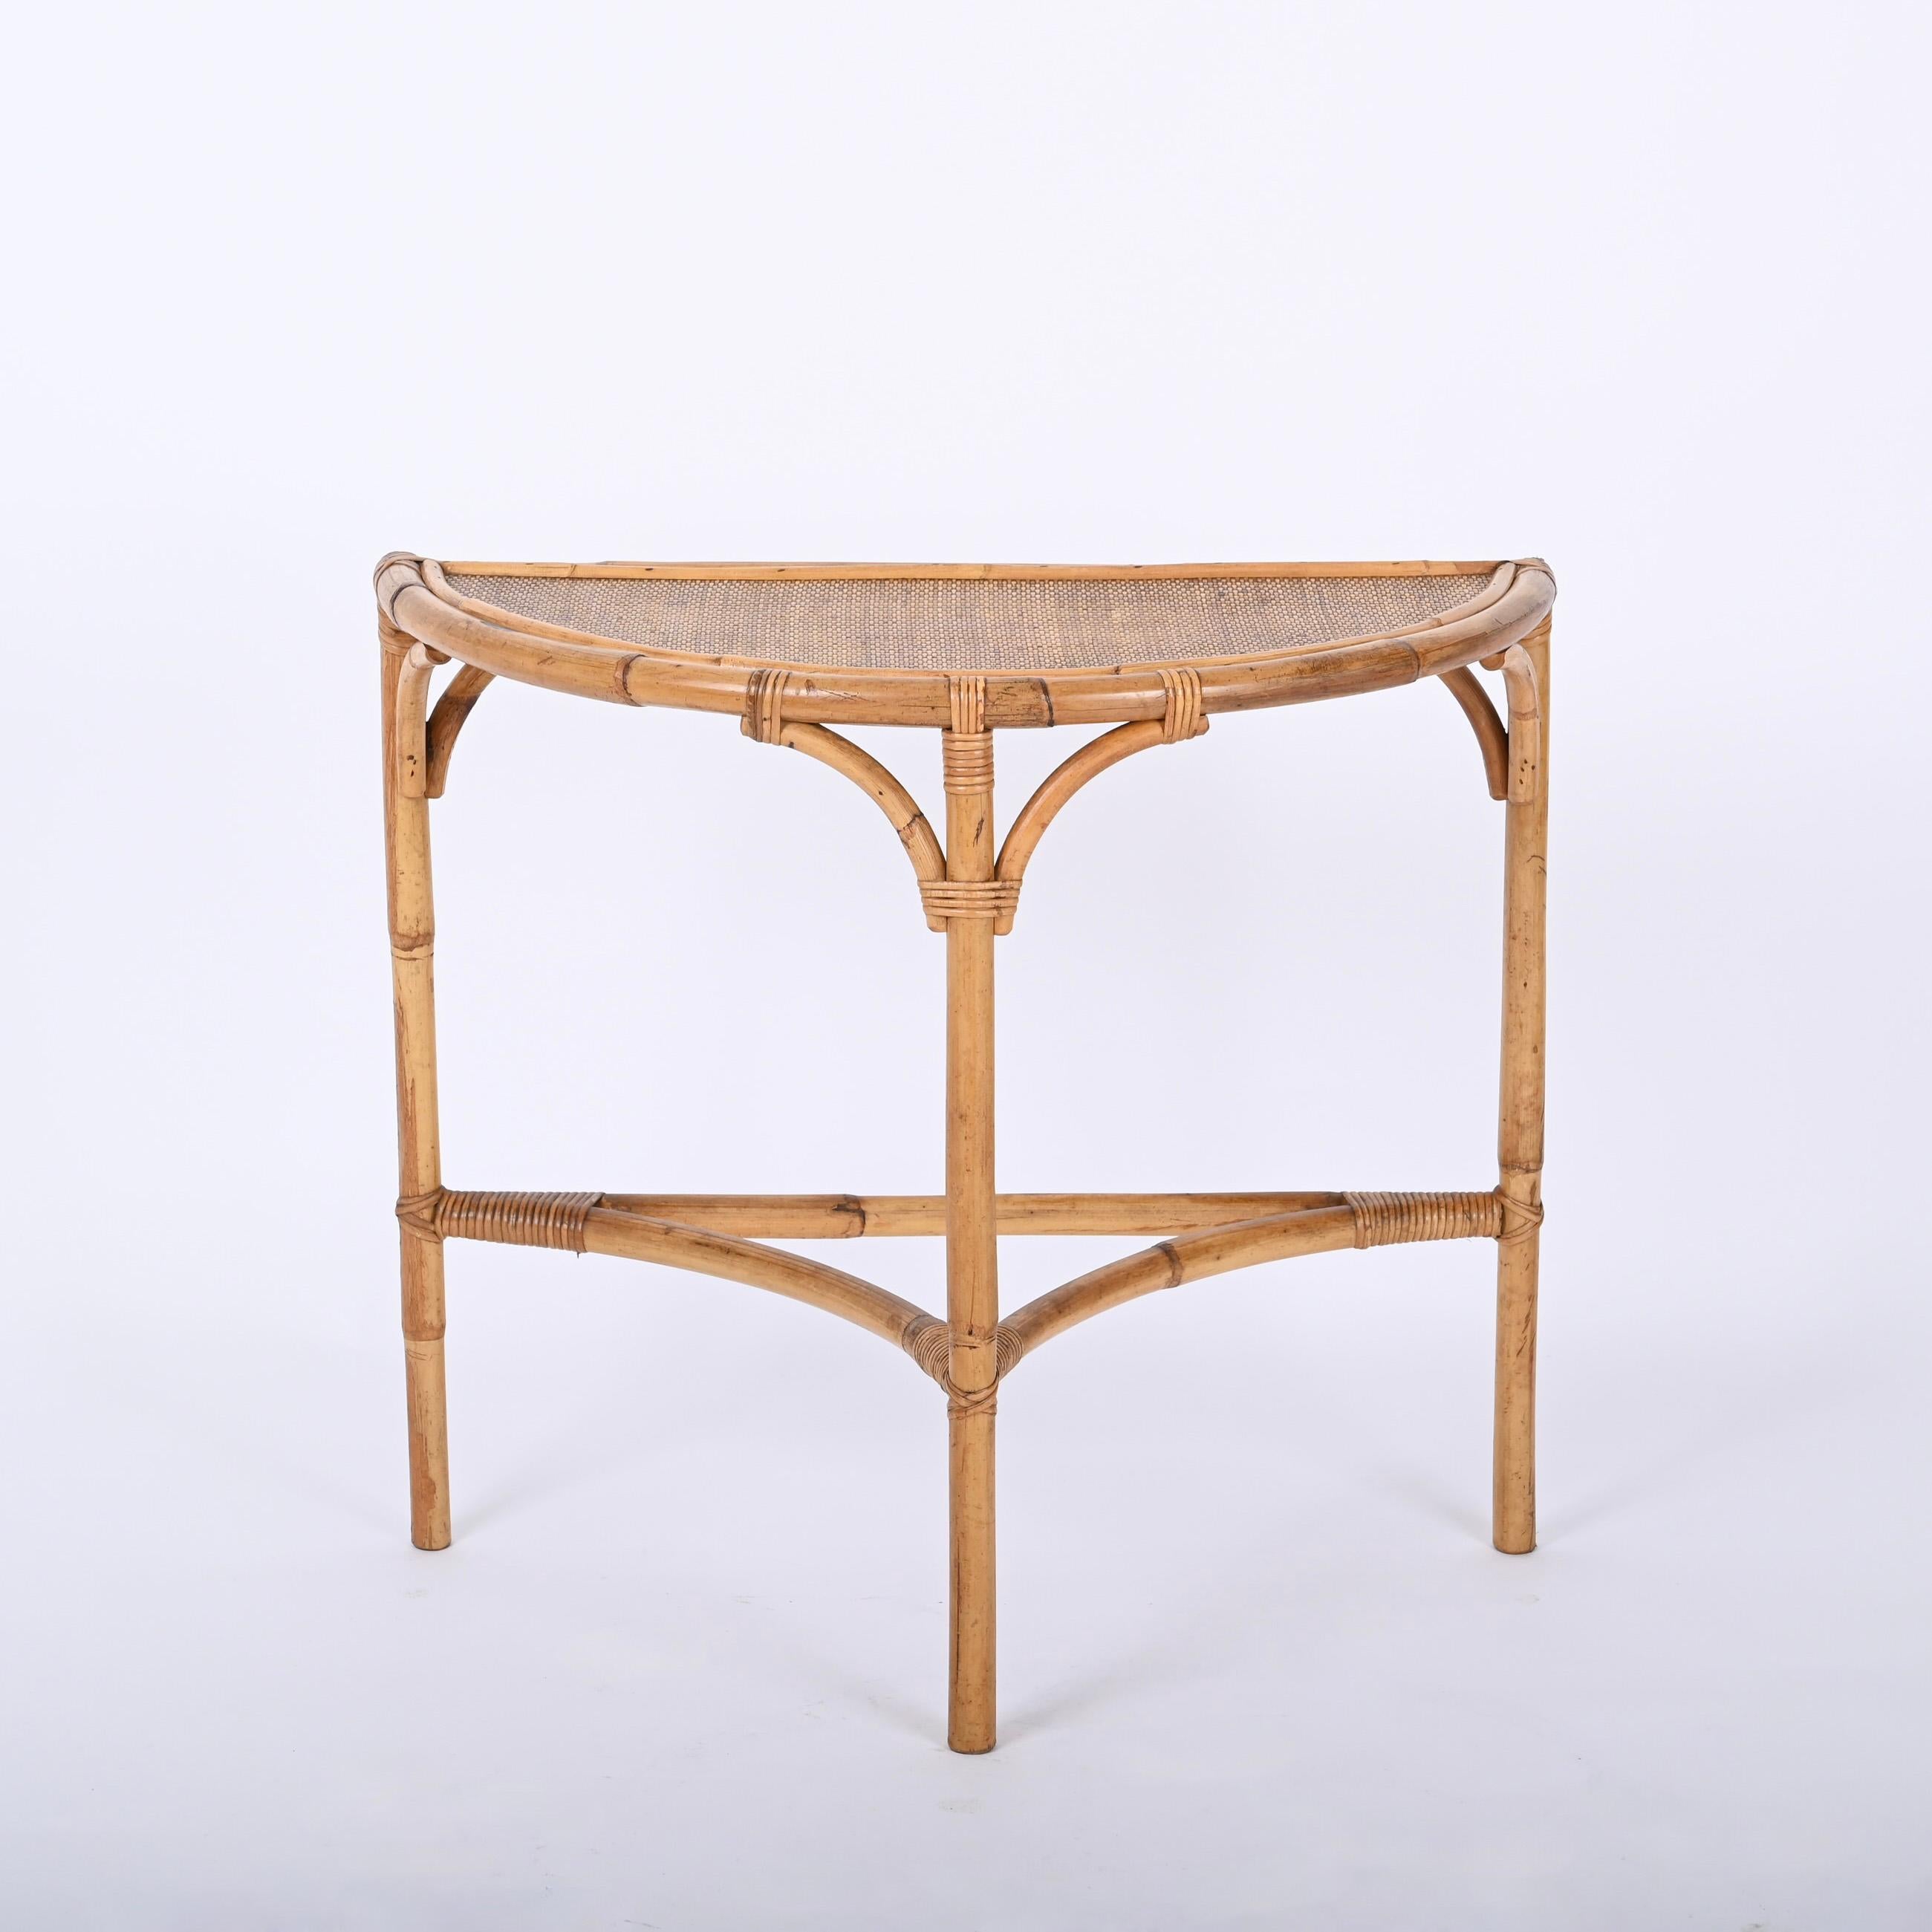 Italian Midcentury Bamboo and Rattan Arched Console in the Style of Albini, 1970s